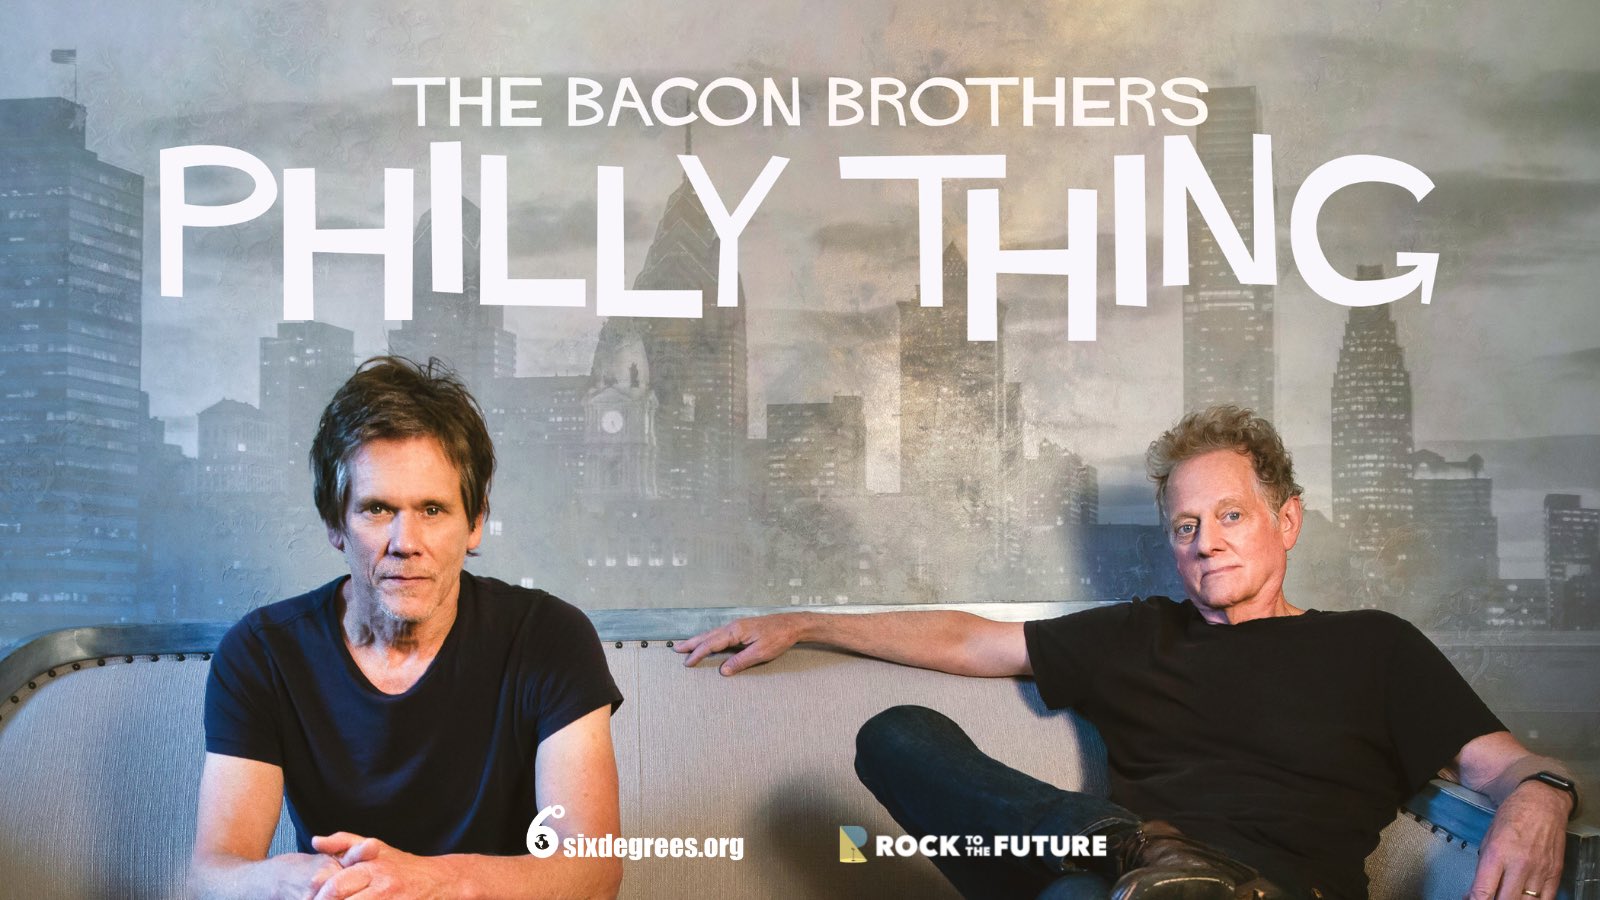 Philly Thing” Takes the City by Storm - Rock to the Future